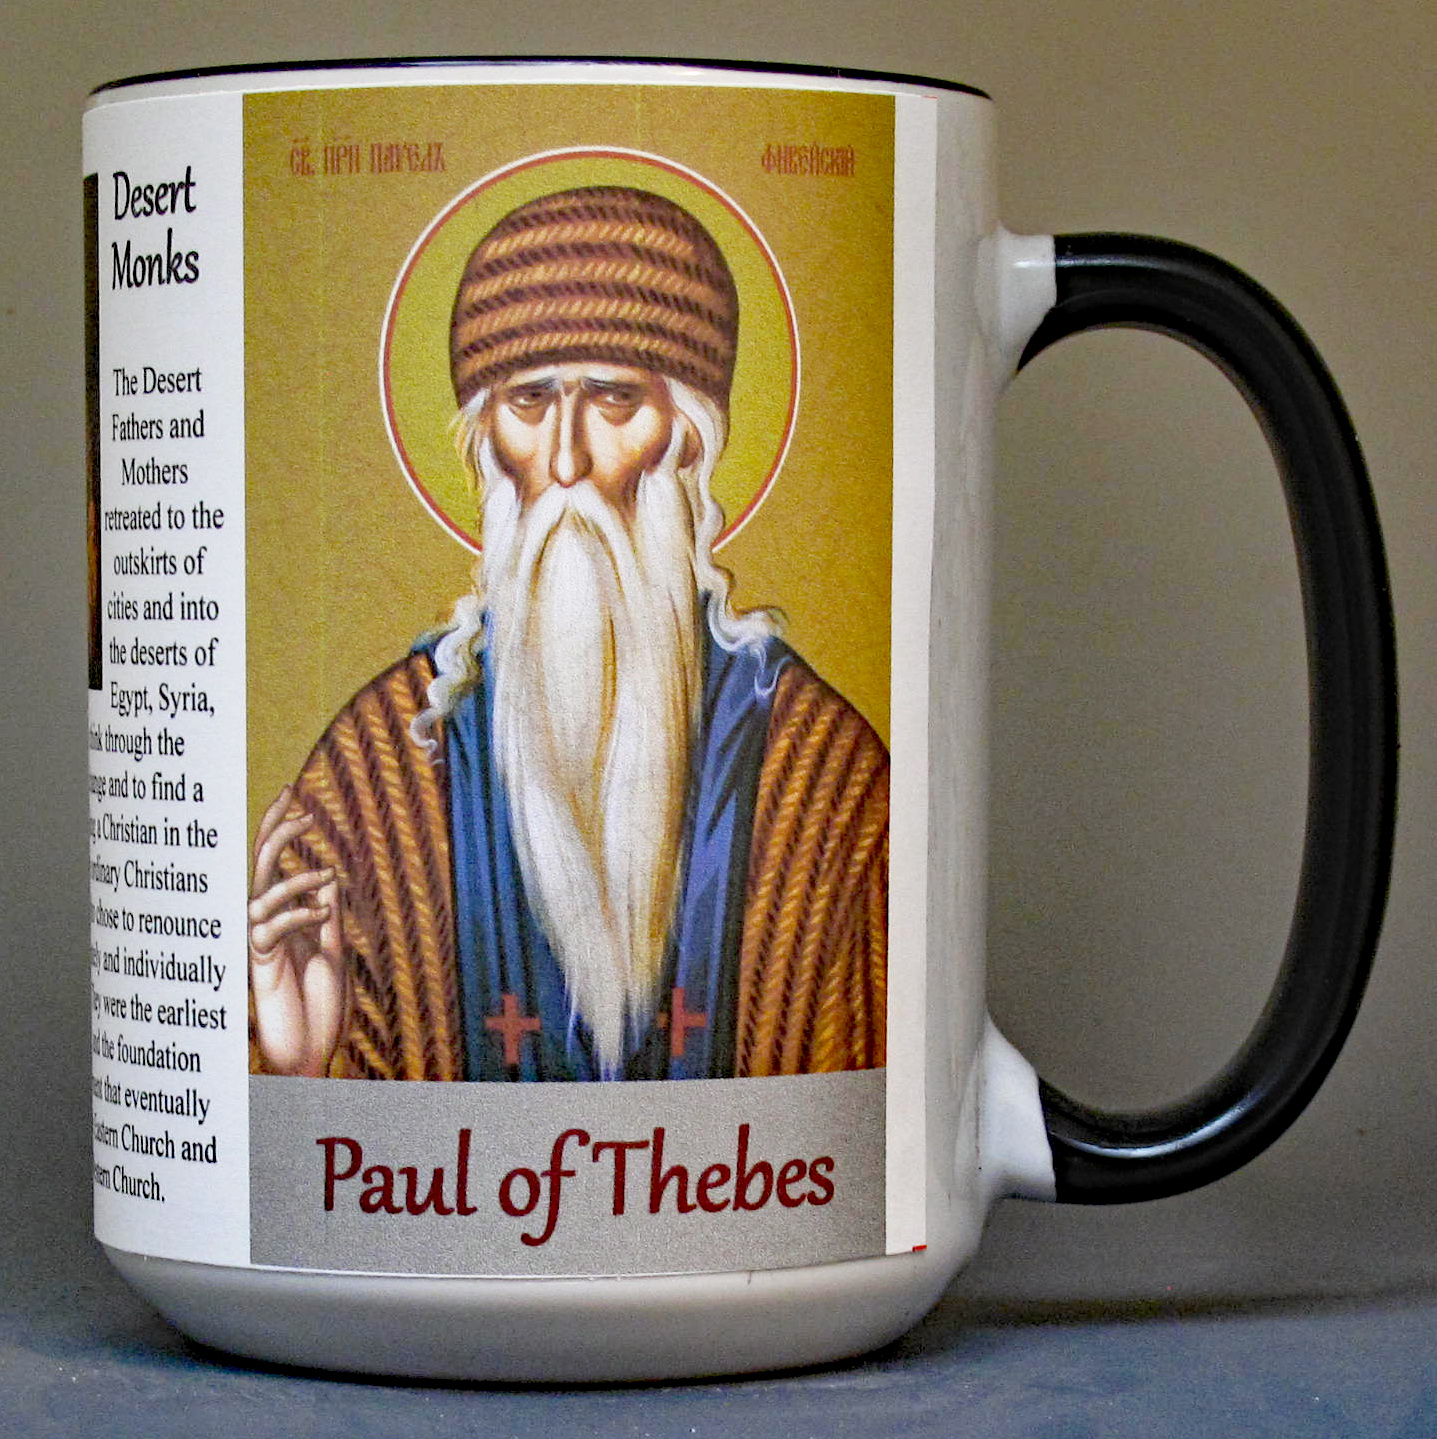 Desert Fathers and Paul of Thebes, Christian hermits, biographical history mug.